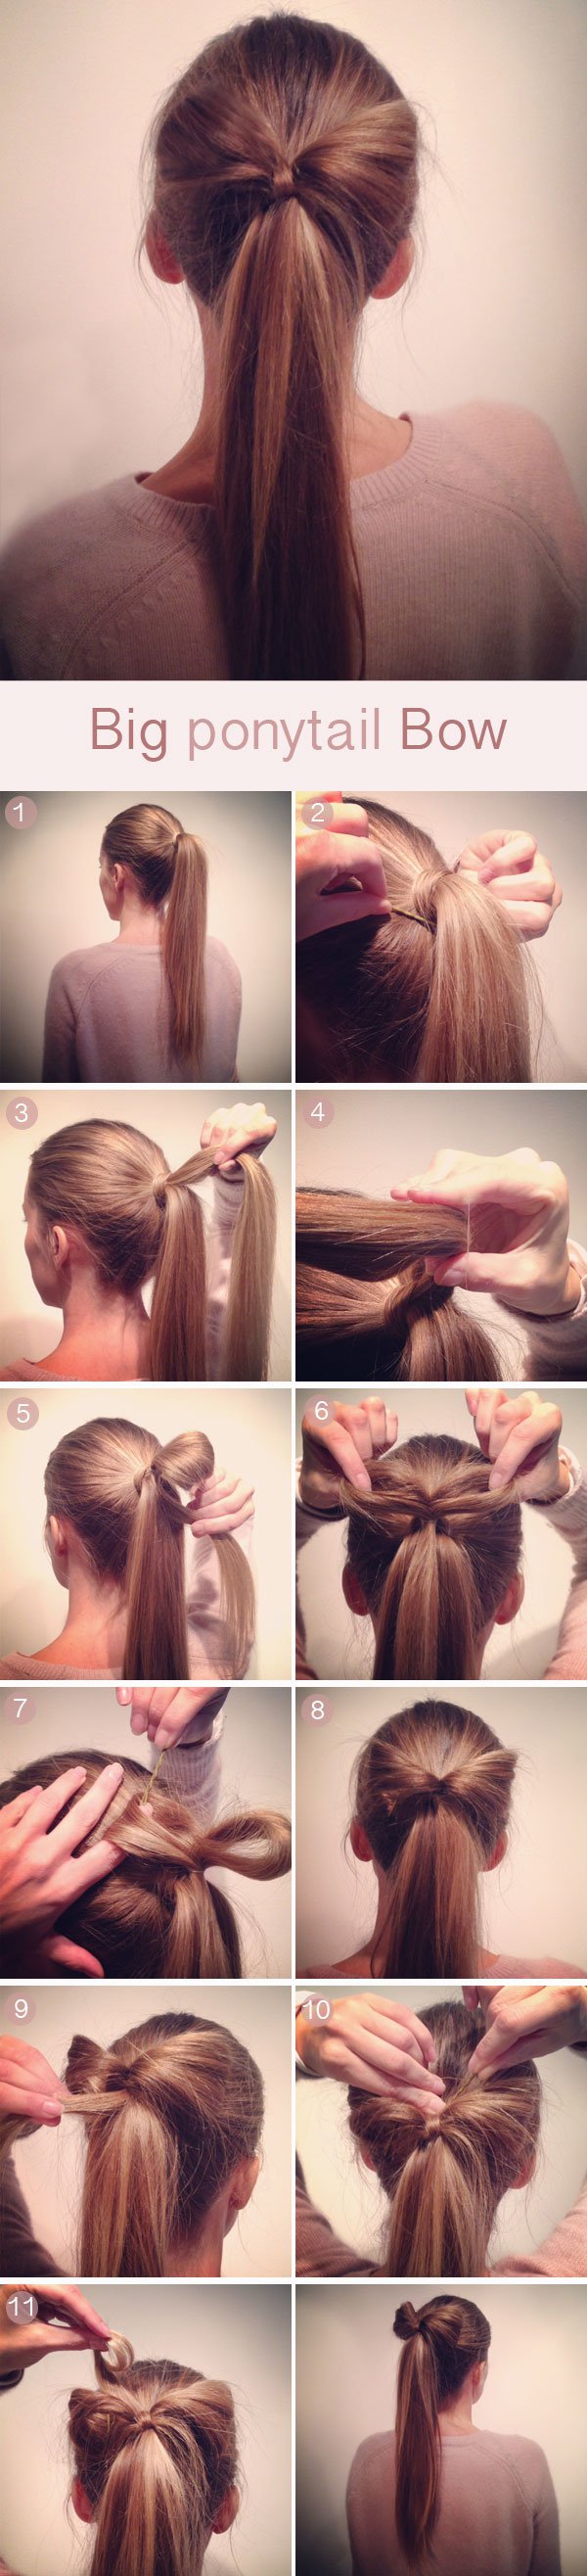 Ponytail Hairstyle with a Hair Bow